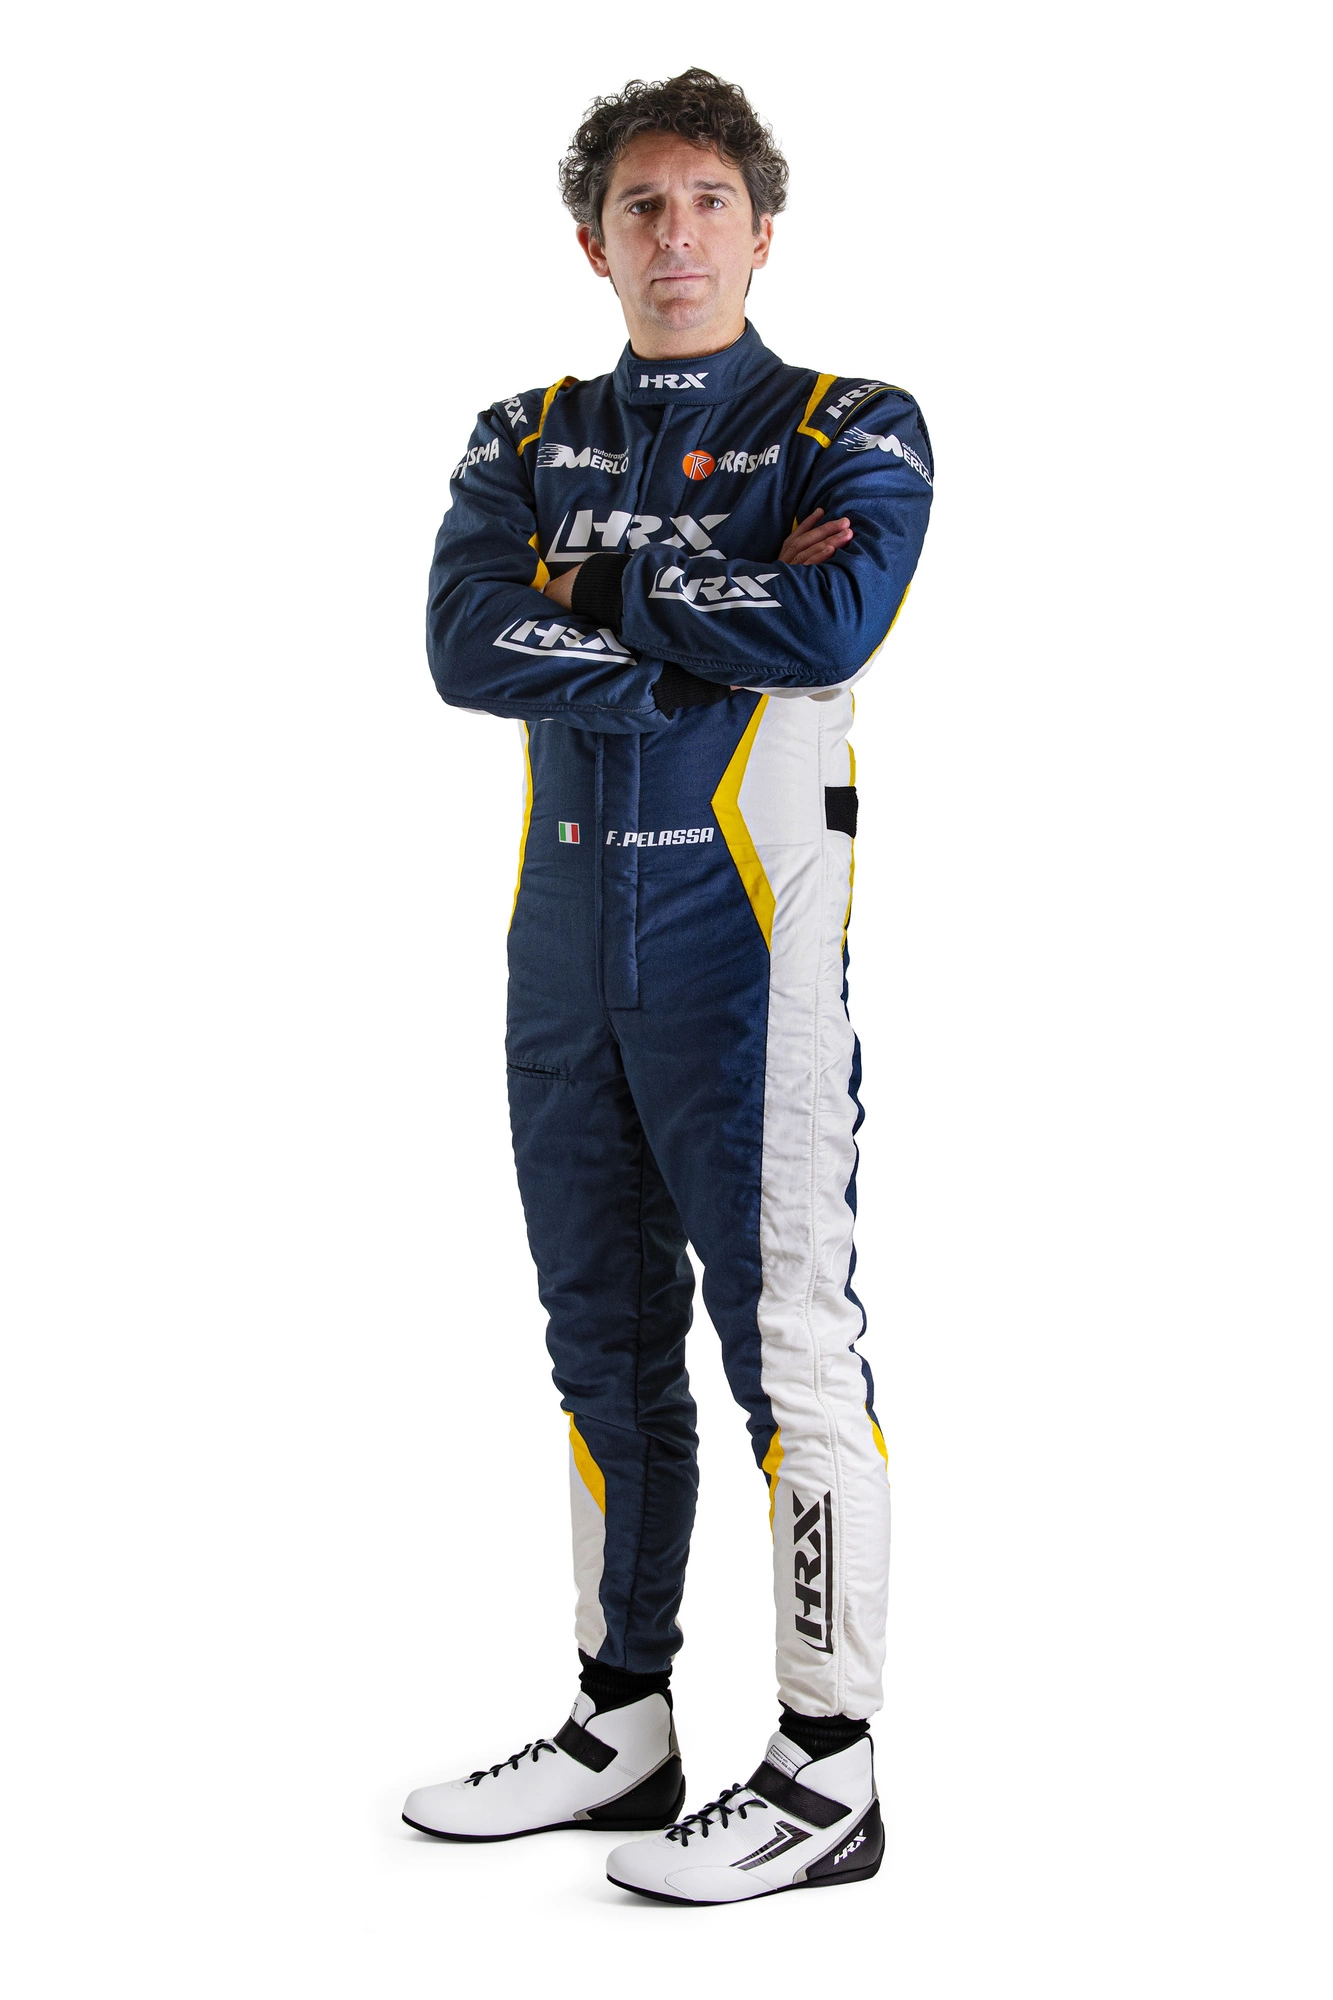 The new Veloce racing suit from HRX